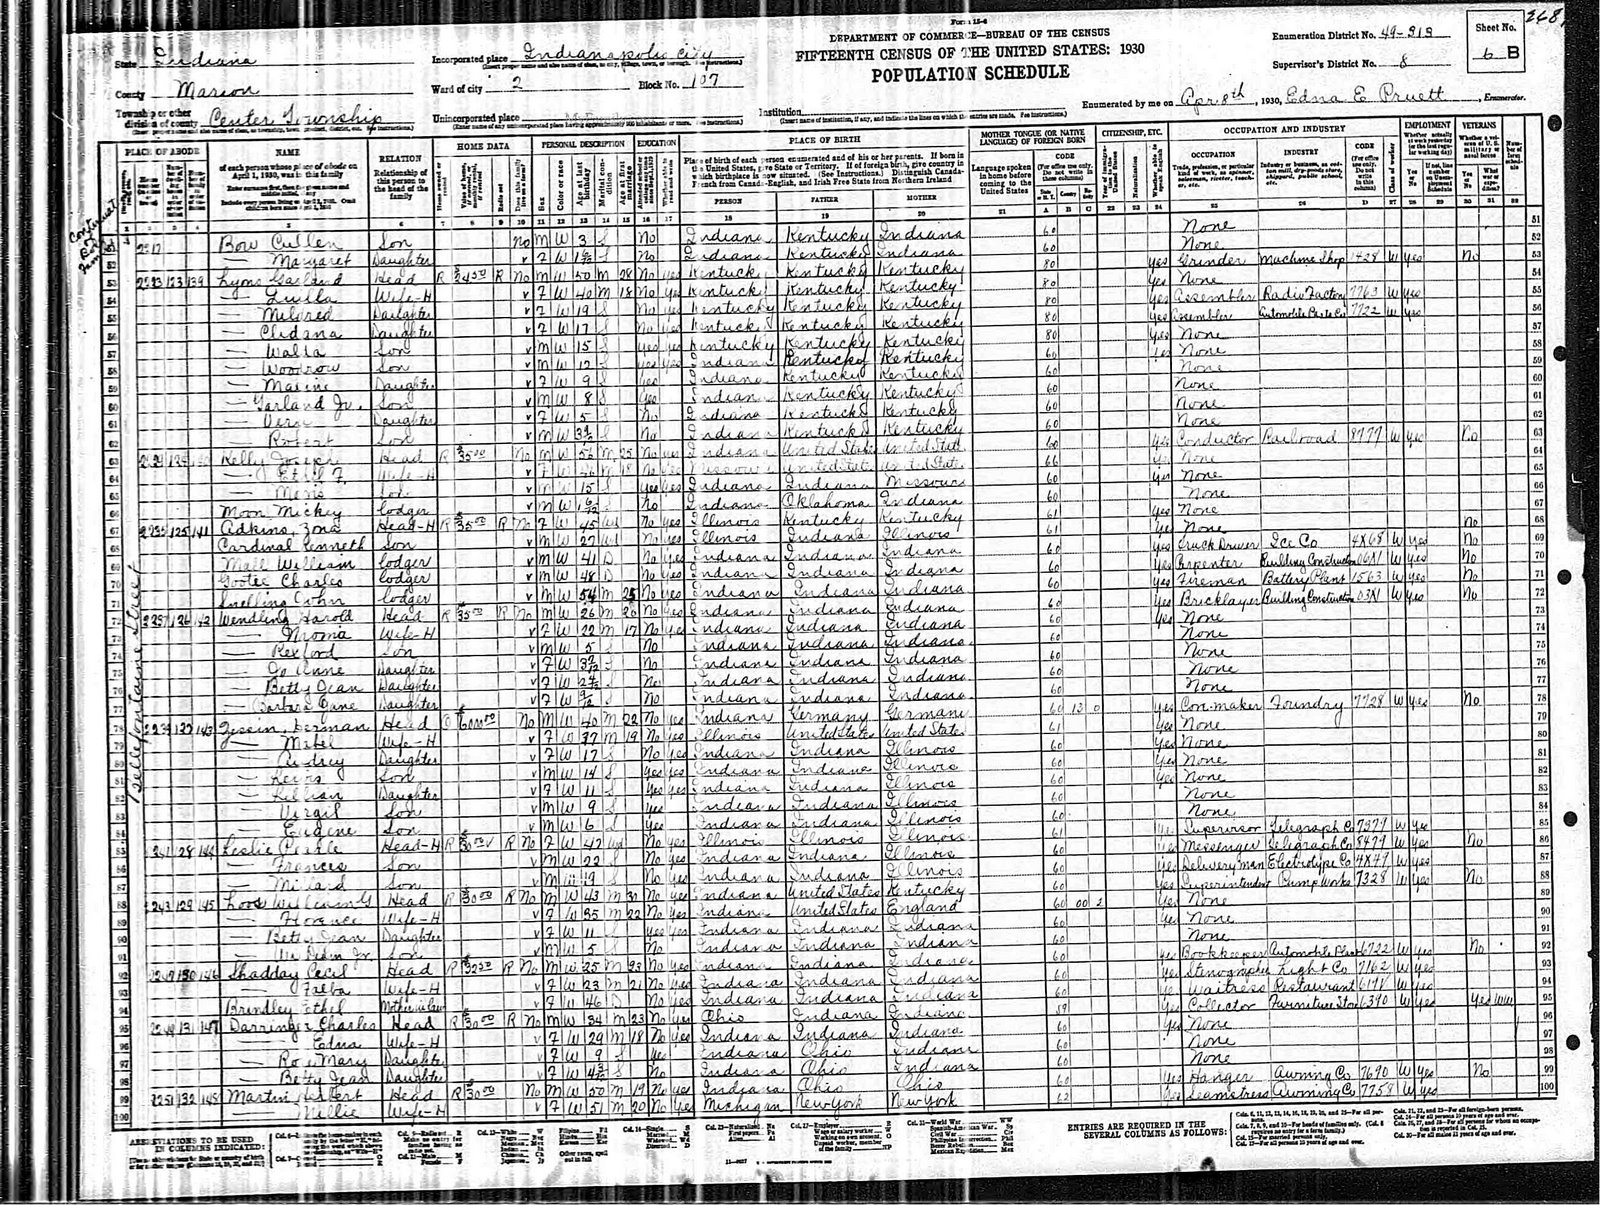 [1930+Census+-+Ethel+Brindley+with+Shaddays+in+Indianapolis.jpg]